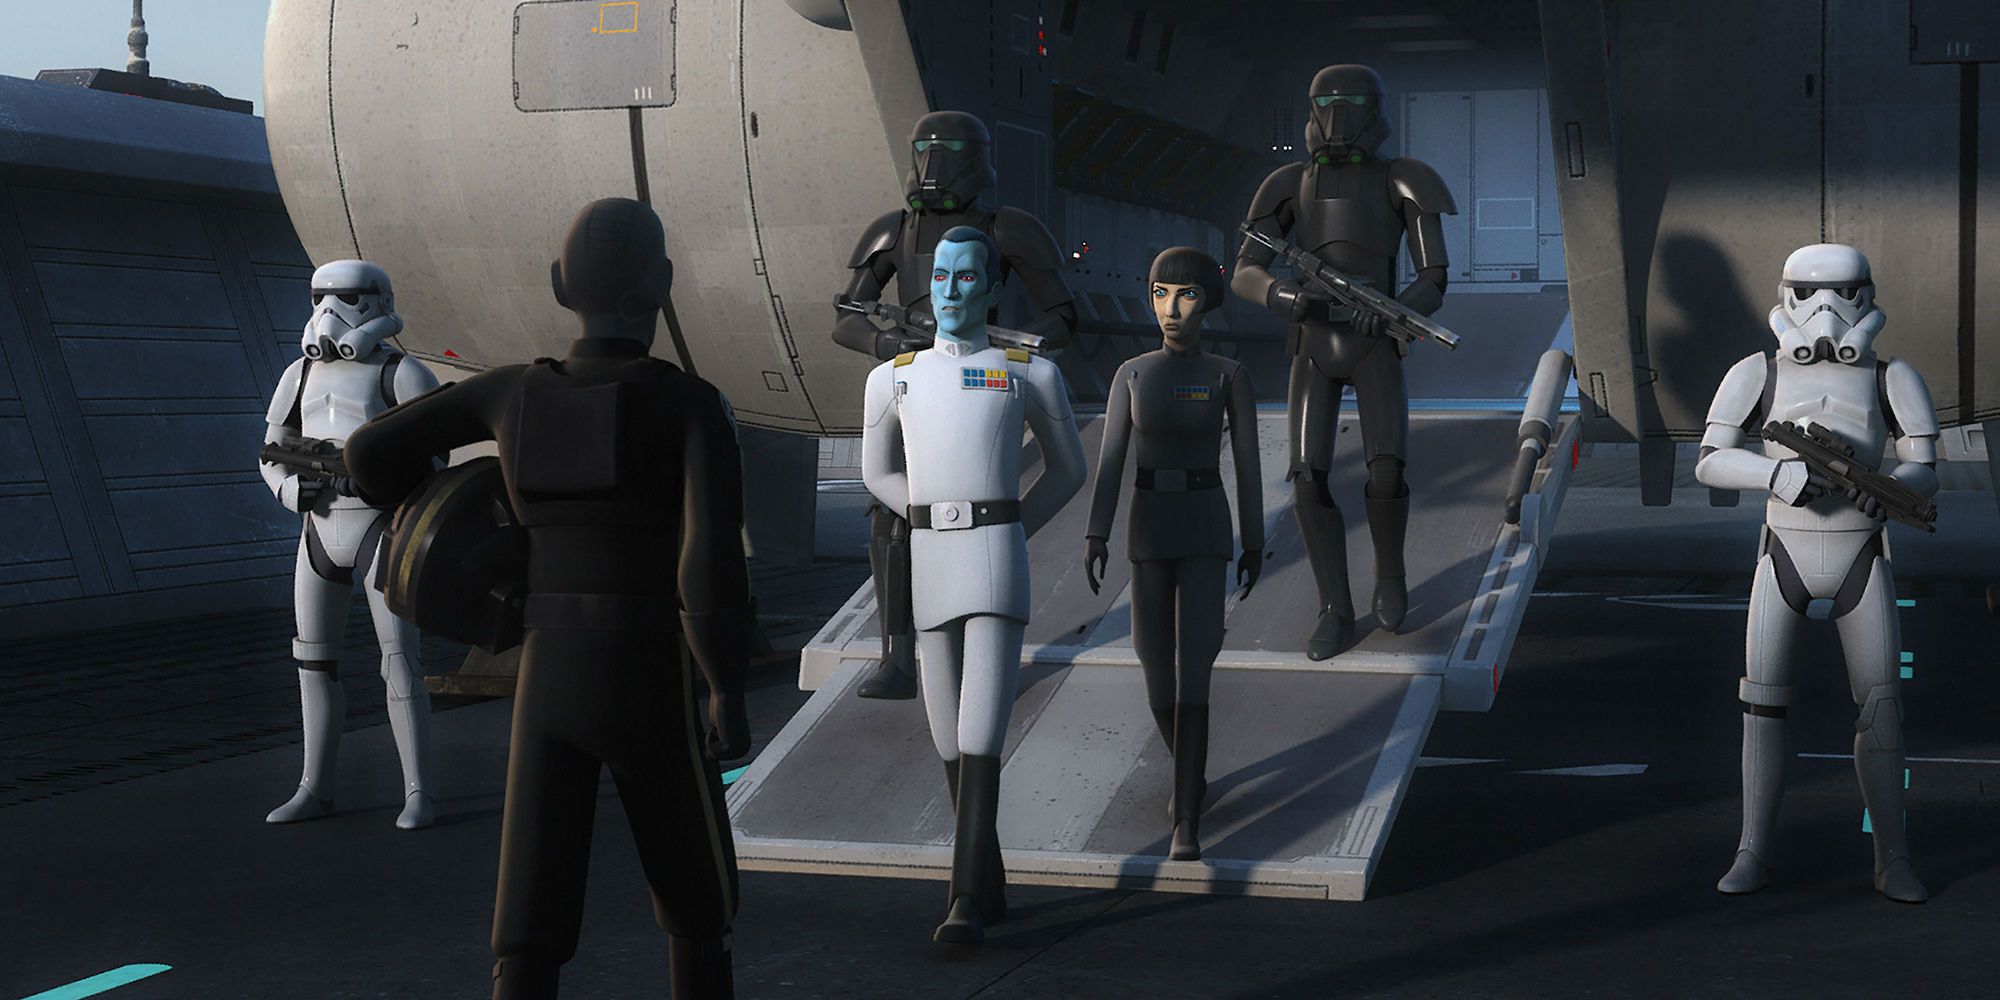 Thrawn accompanied by Pryce and stormtroopers in Rebels